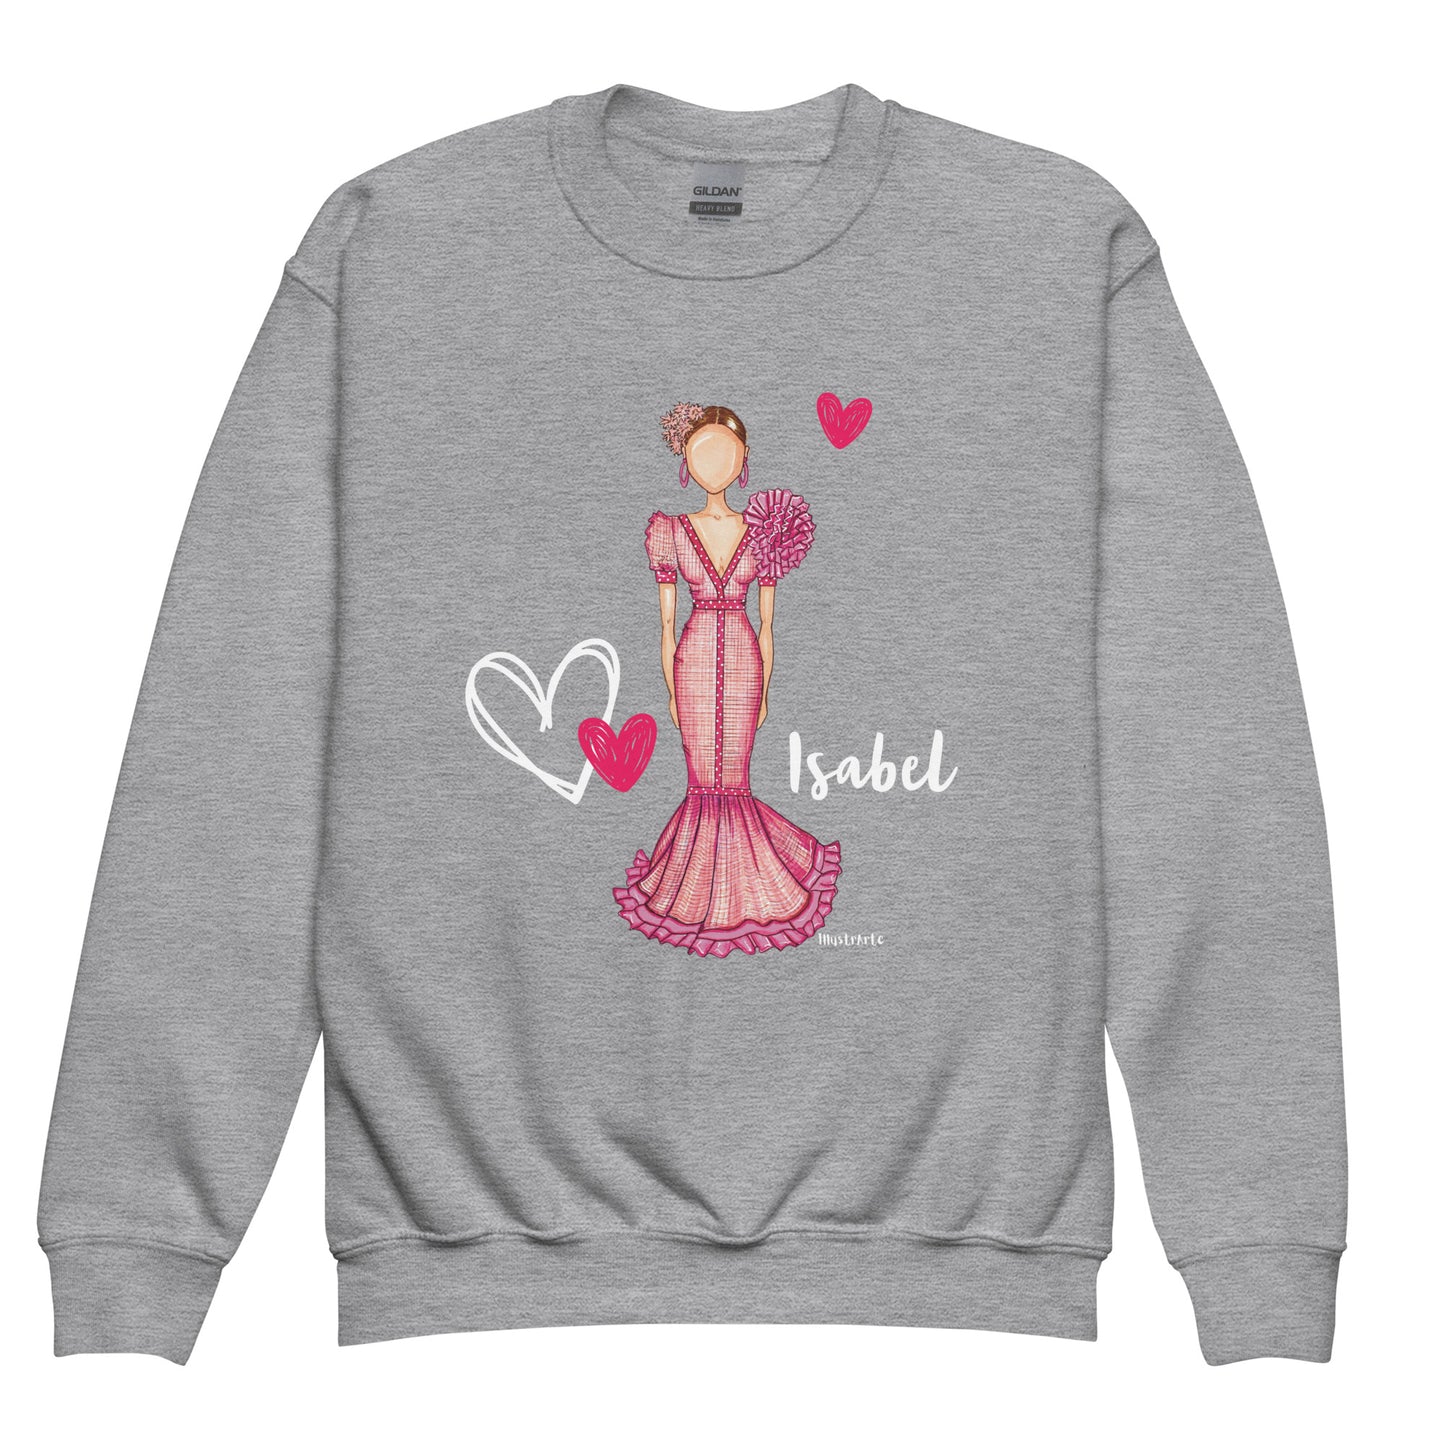 a sweatshirt with a woman in a pink dress